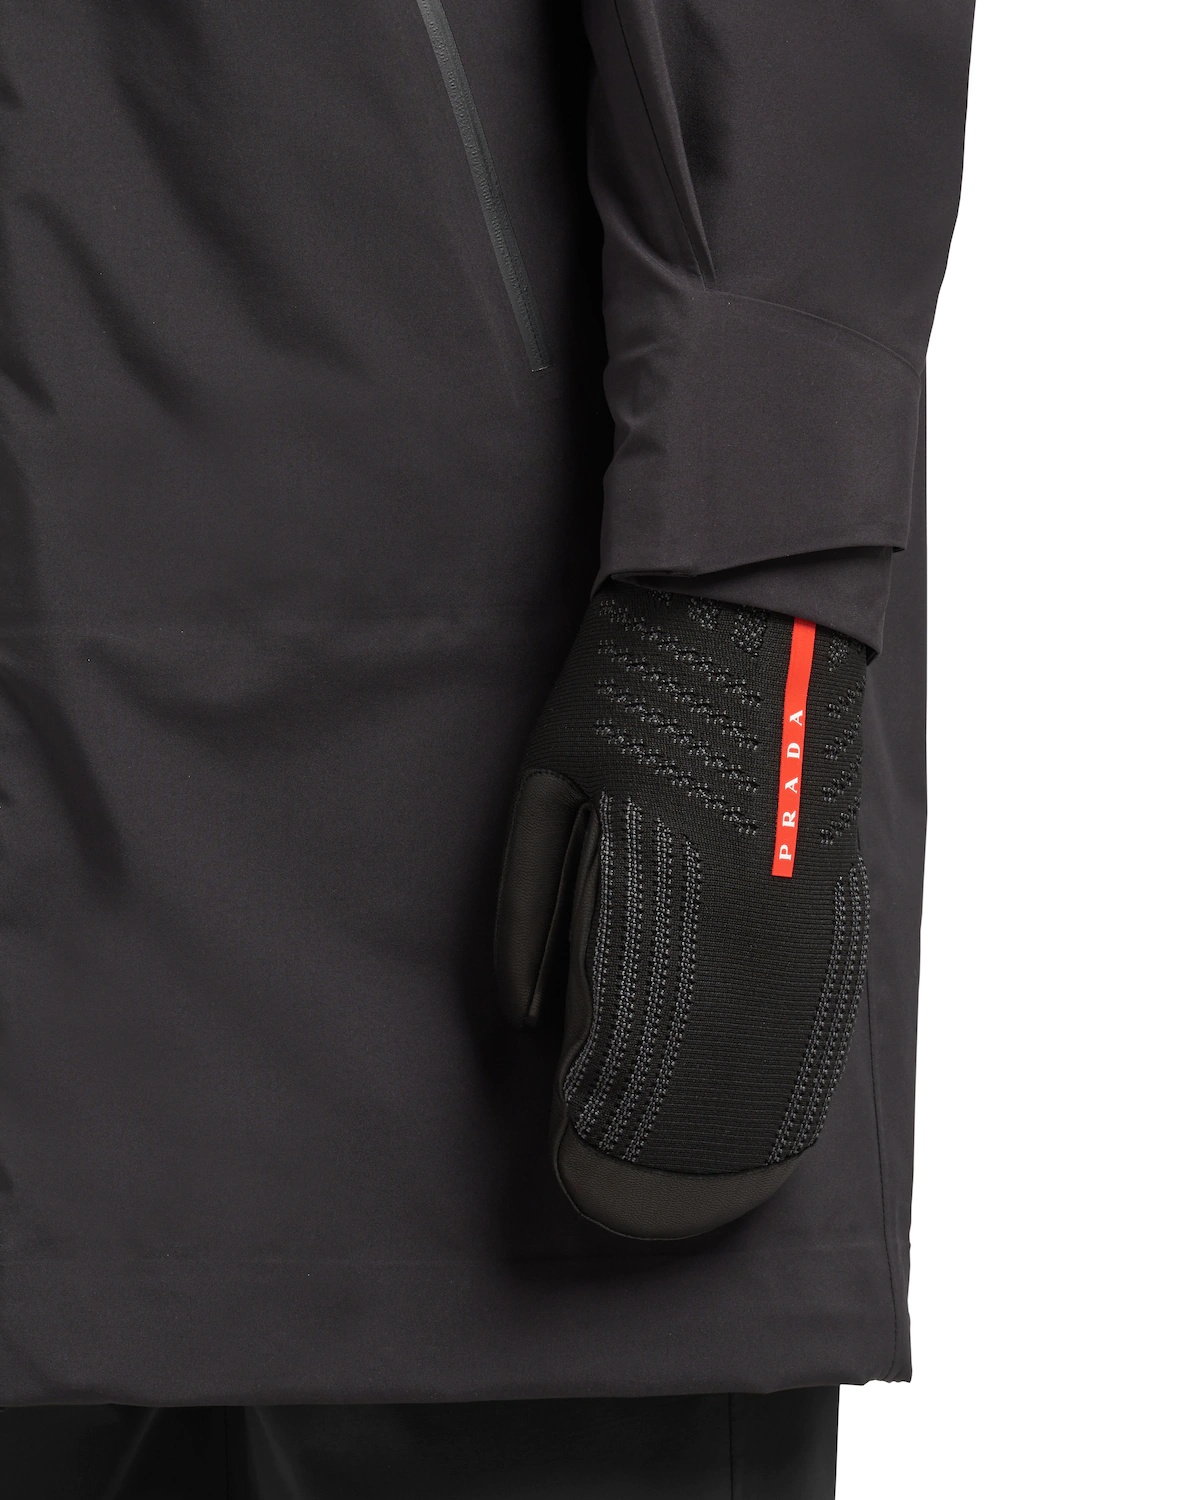 GORE-TEX, leather and knit ski mittens - 2